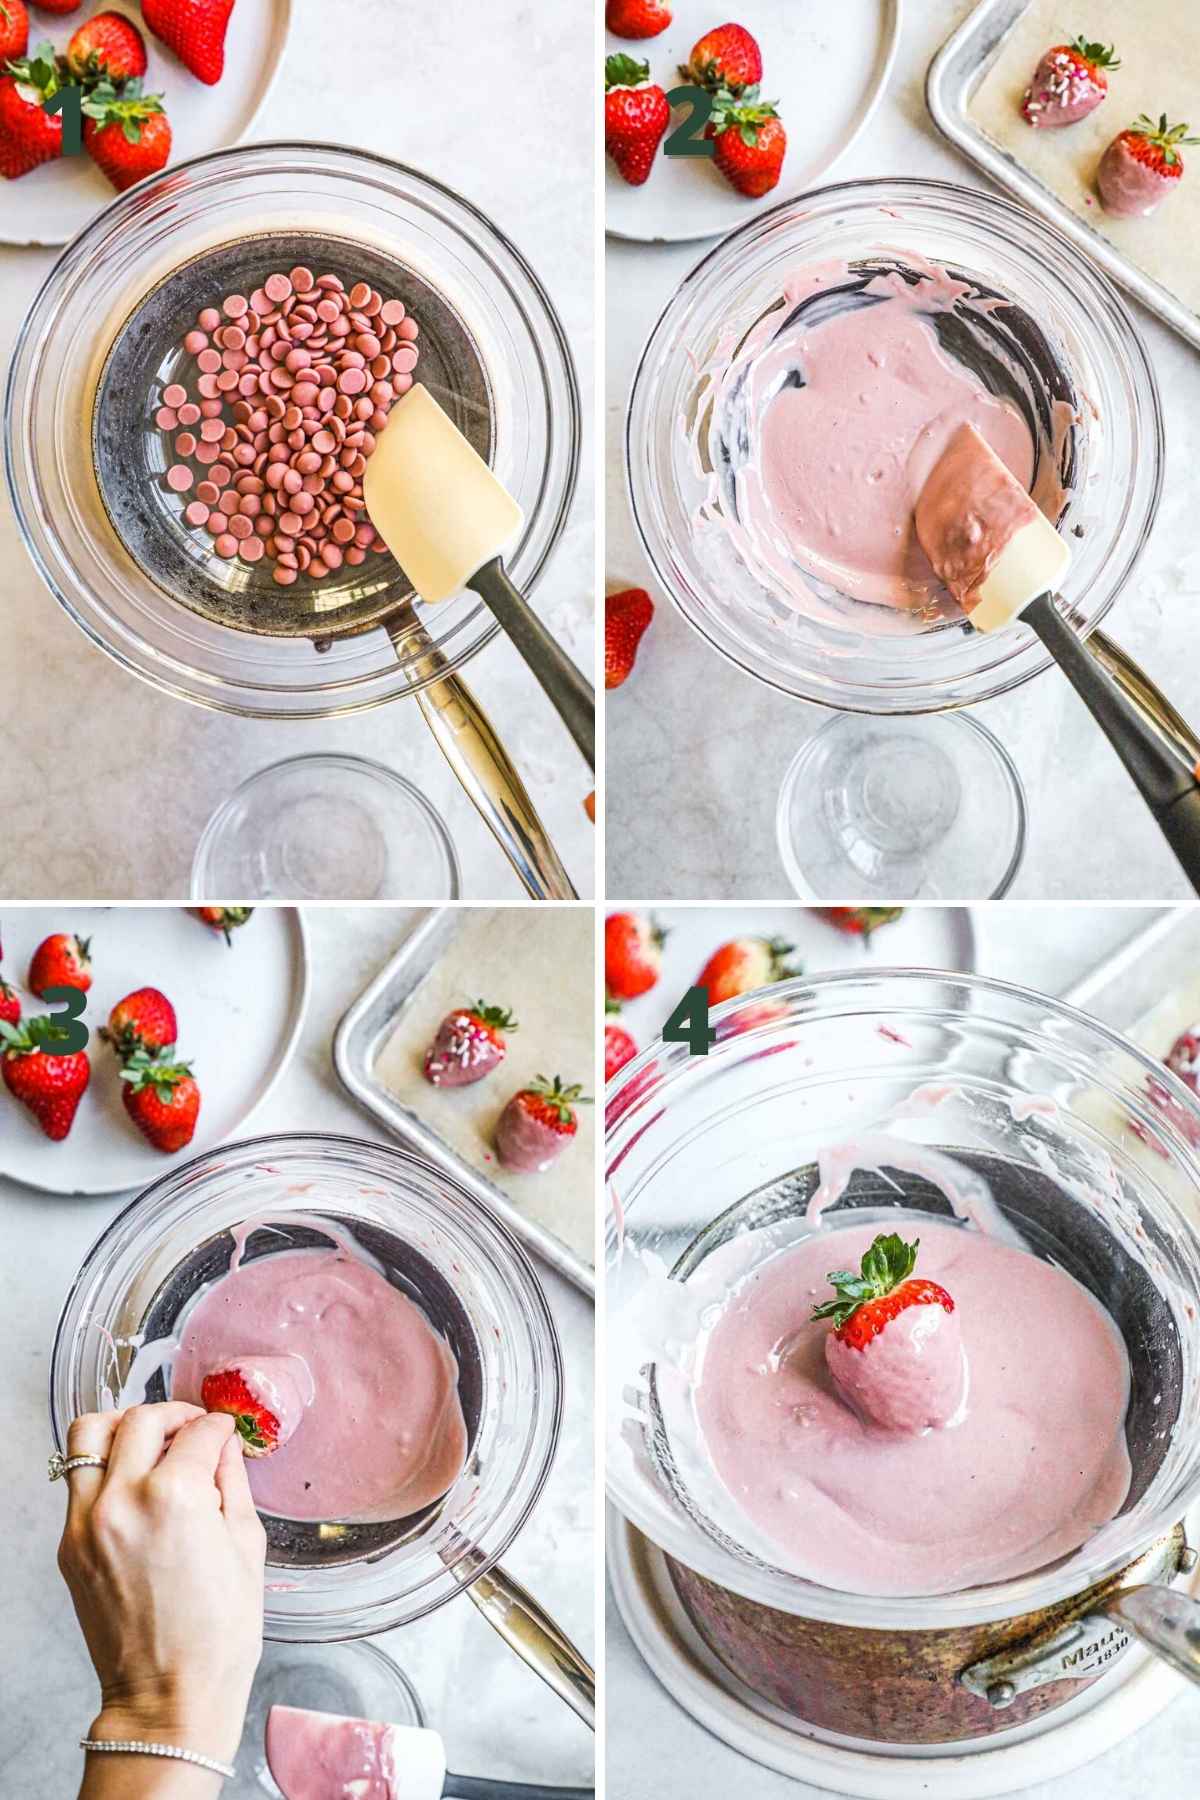 Instructions to make pink chocolate covered strawberries, including melting the ruby chocolate, dipping the strawberries, and chilling the ruby pink chocolate dipped berries.